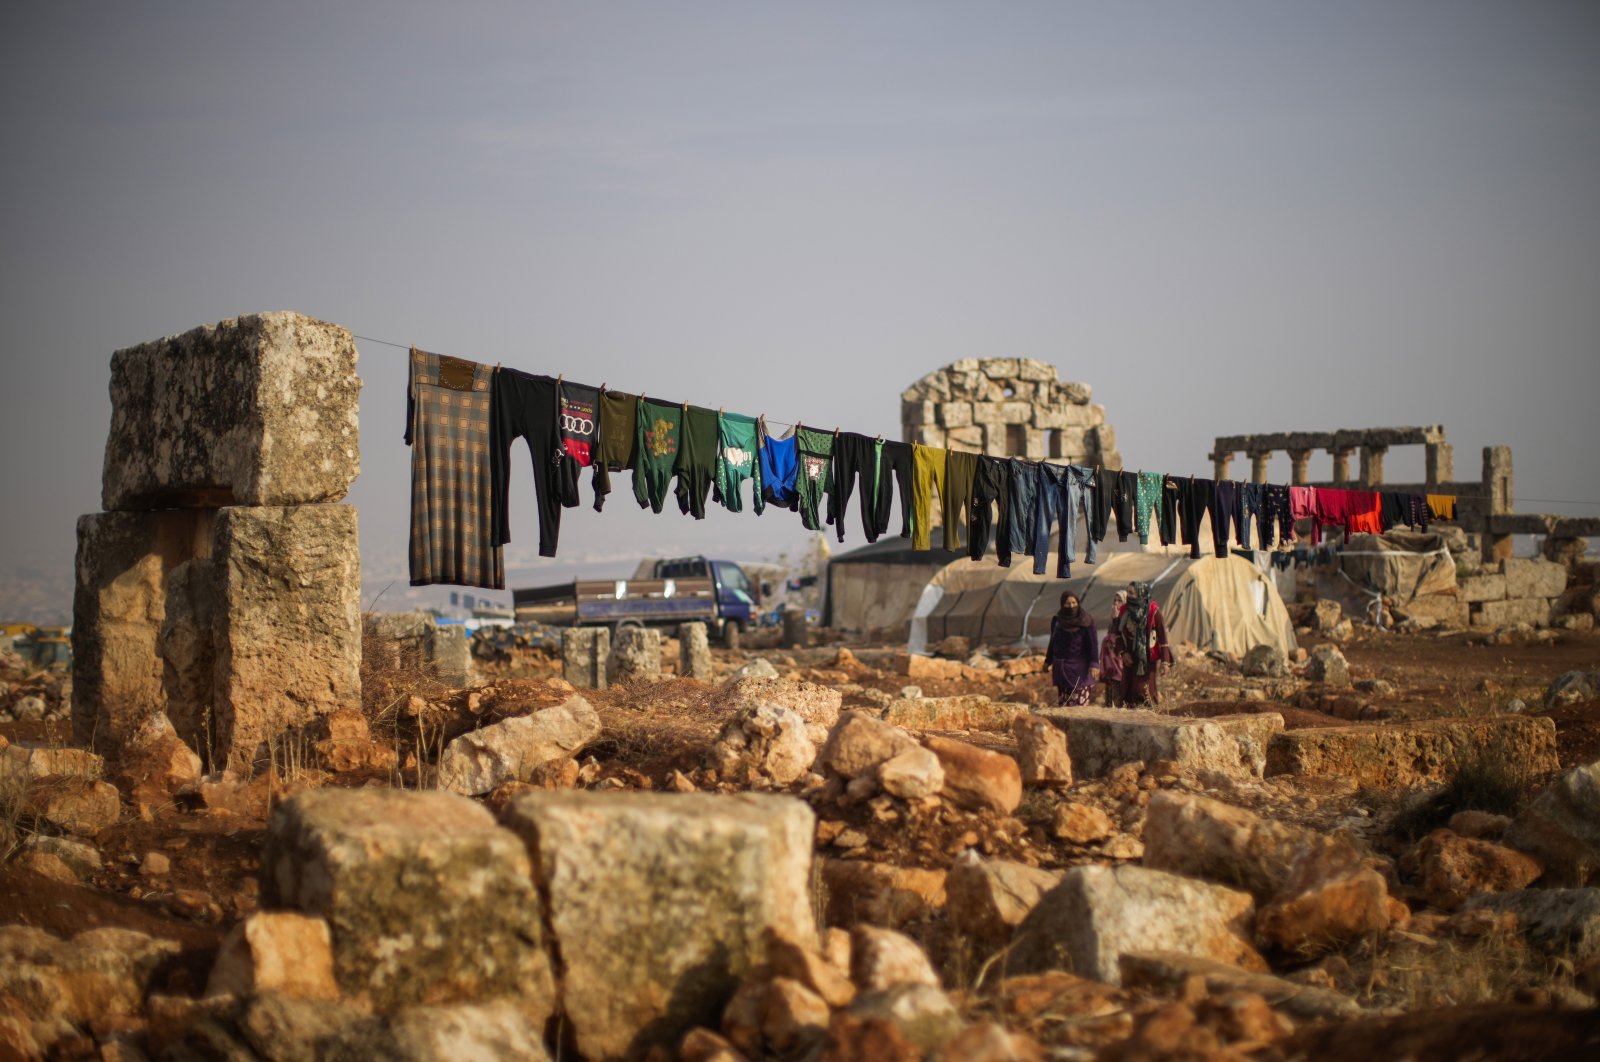 Displaced Syrian people walk next to ancient Roman-era ruins where they have set up their tents in the Sarmada district, north of Idlib city, Syria, Nov. 25, 2021. (AP Photo)